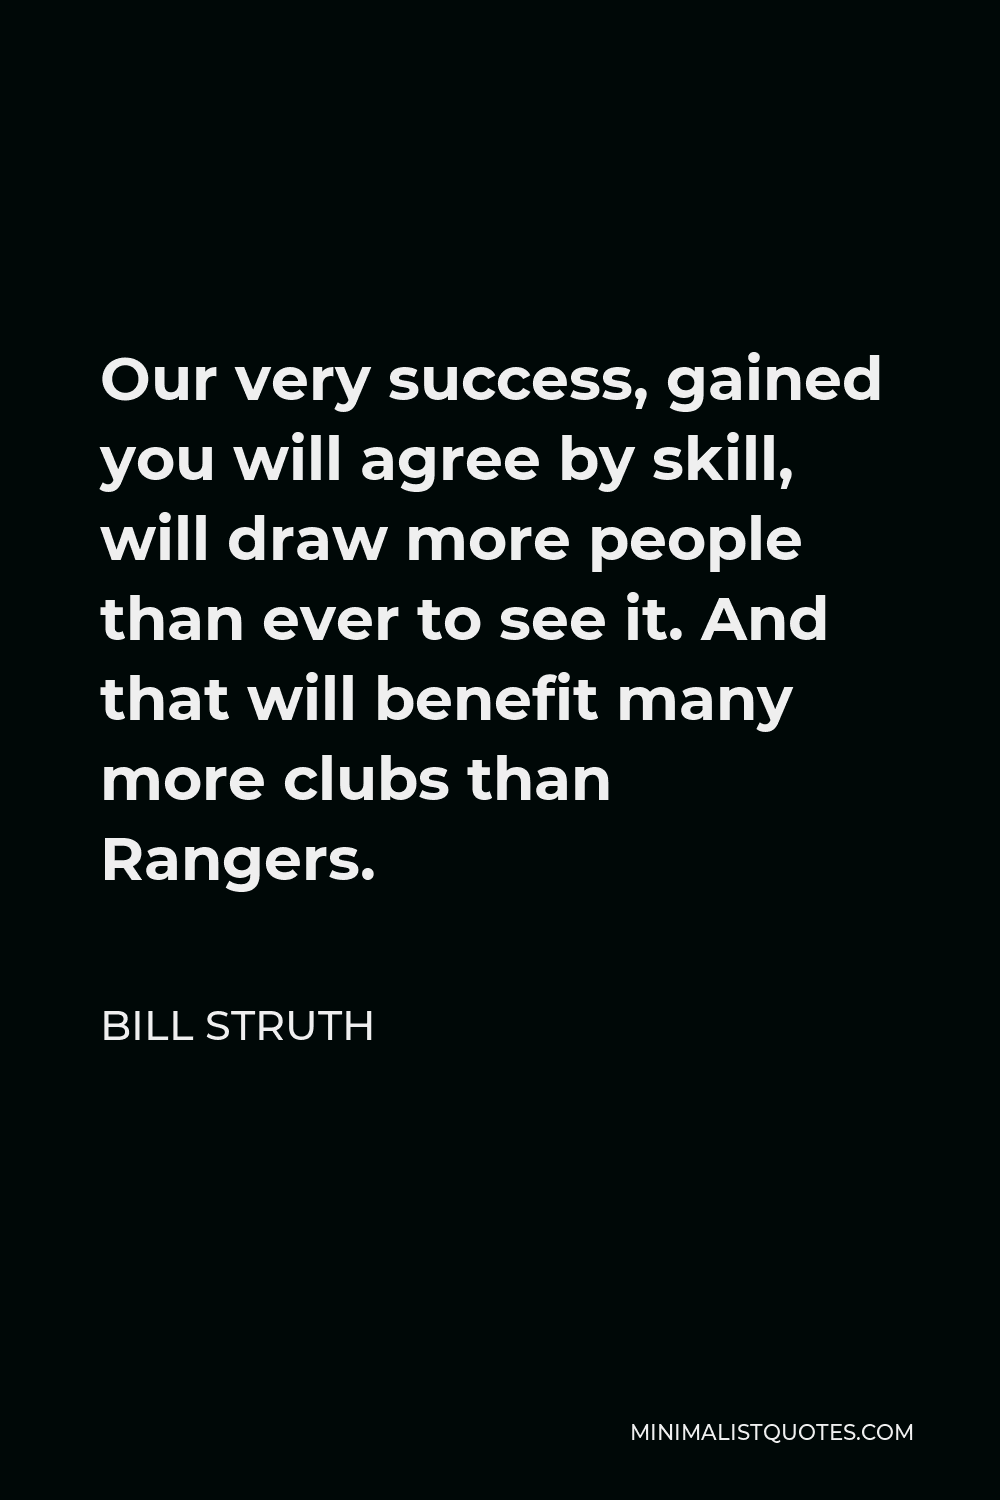 Bill Struth Quote - Our very success, gained you will agree by skill, will draw more people than ever to see it. And that will benefit many more clubs than Rangers.